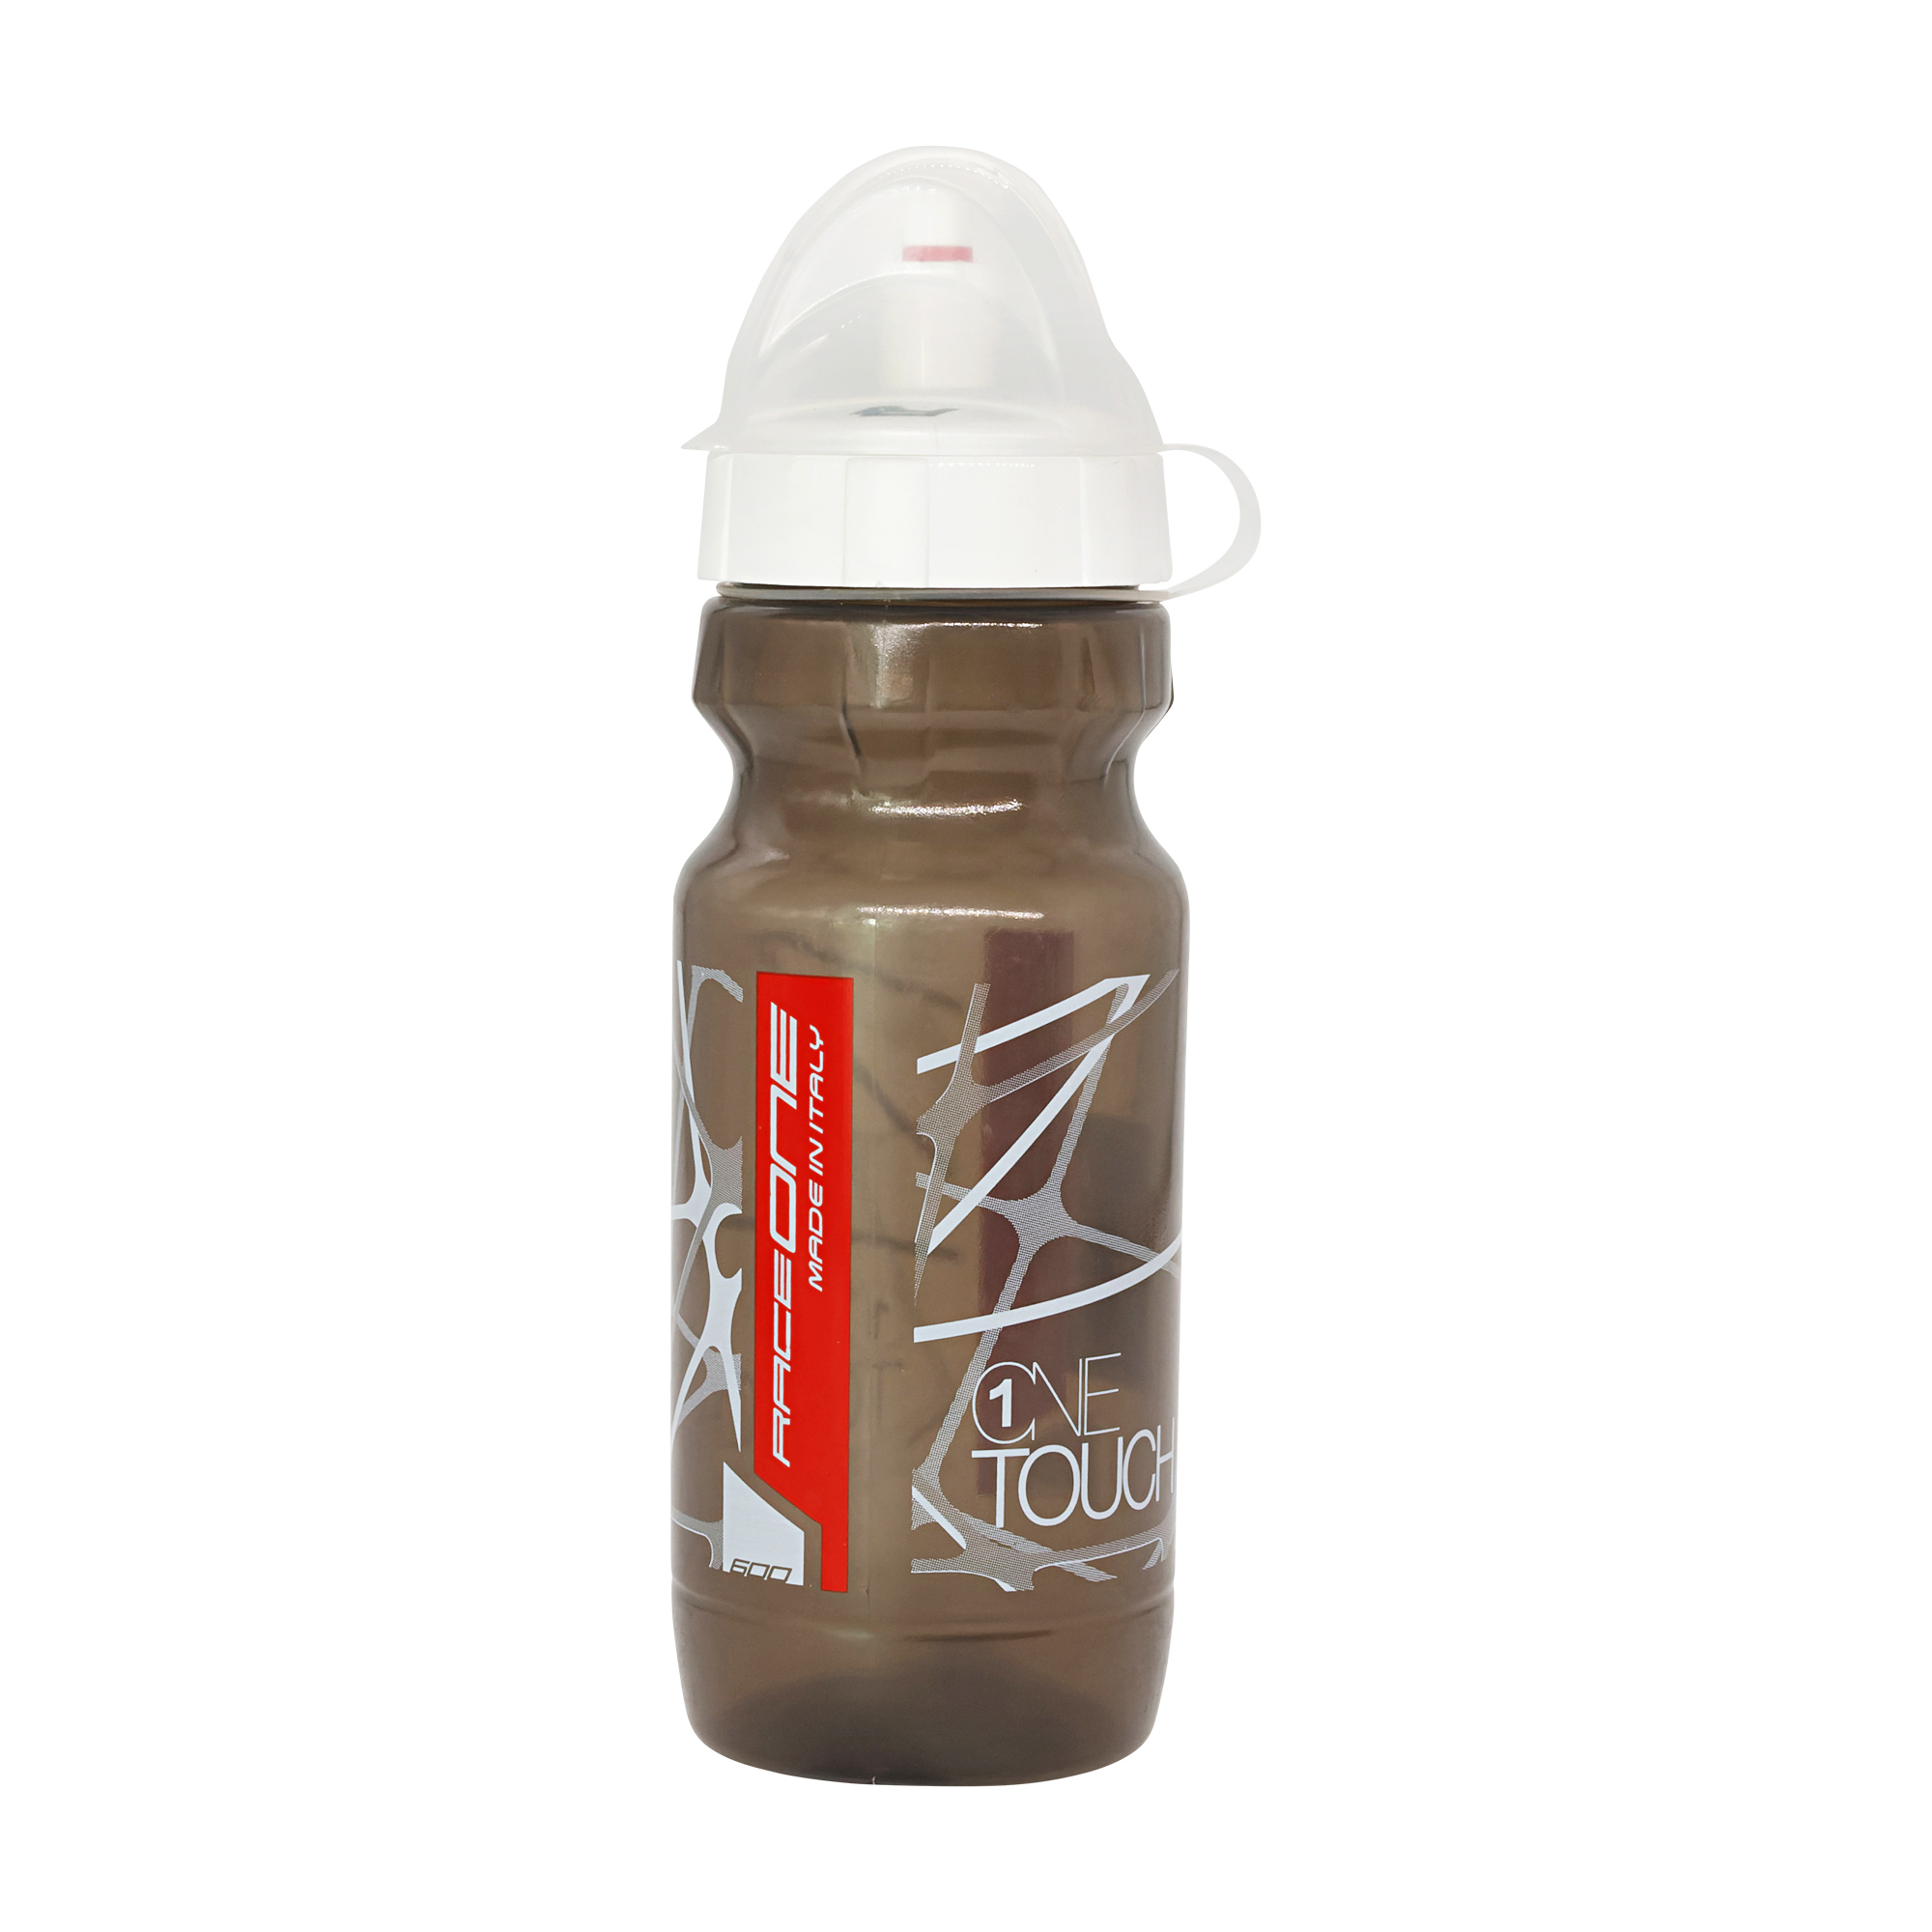 Raceone ONETOUCH 600 ml in Smoke/weiss